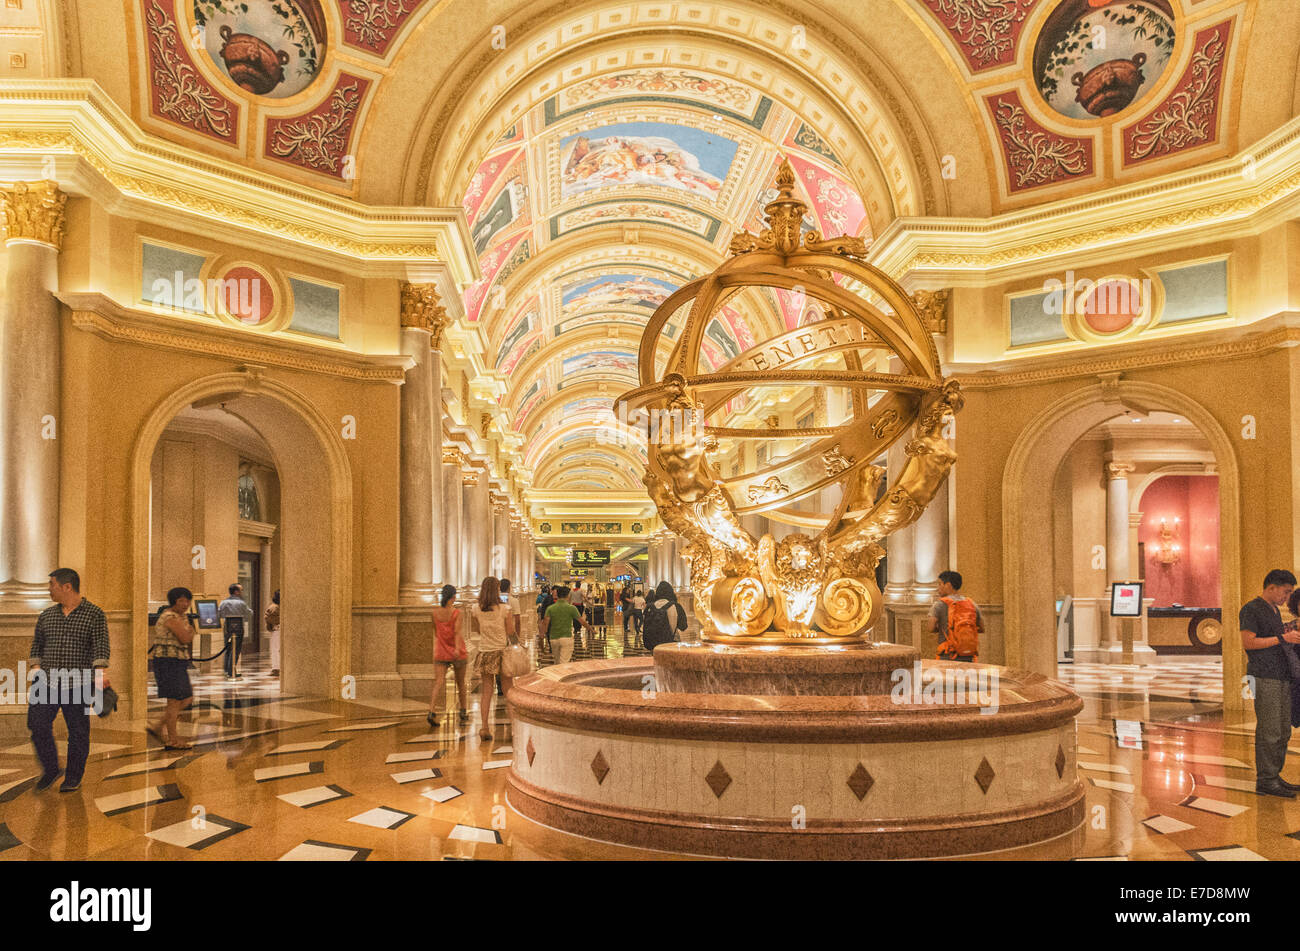 MACAU, CHINA - CIRCA AUG, 2013 : The Venetian Macao resort hotel, Macao, one of the largest hotel and casino in the world. Stock Photo